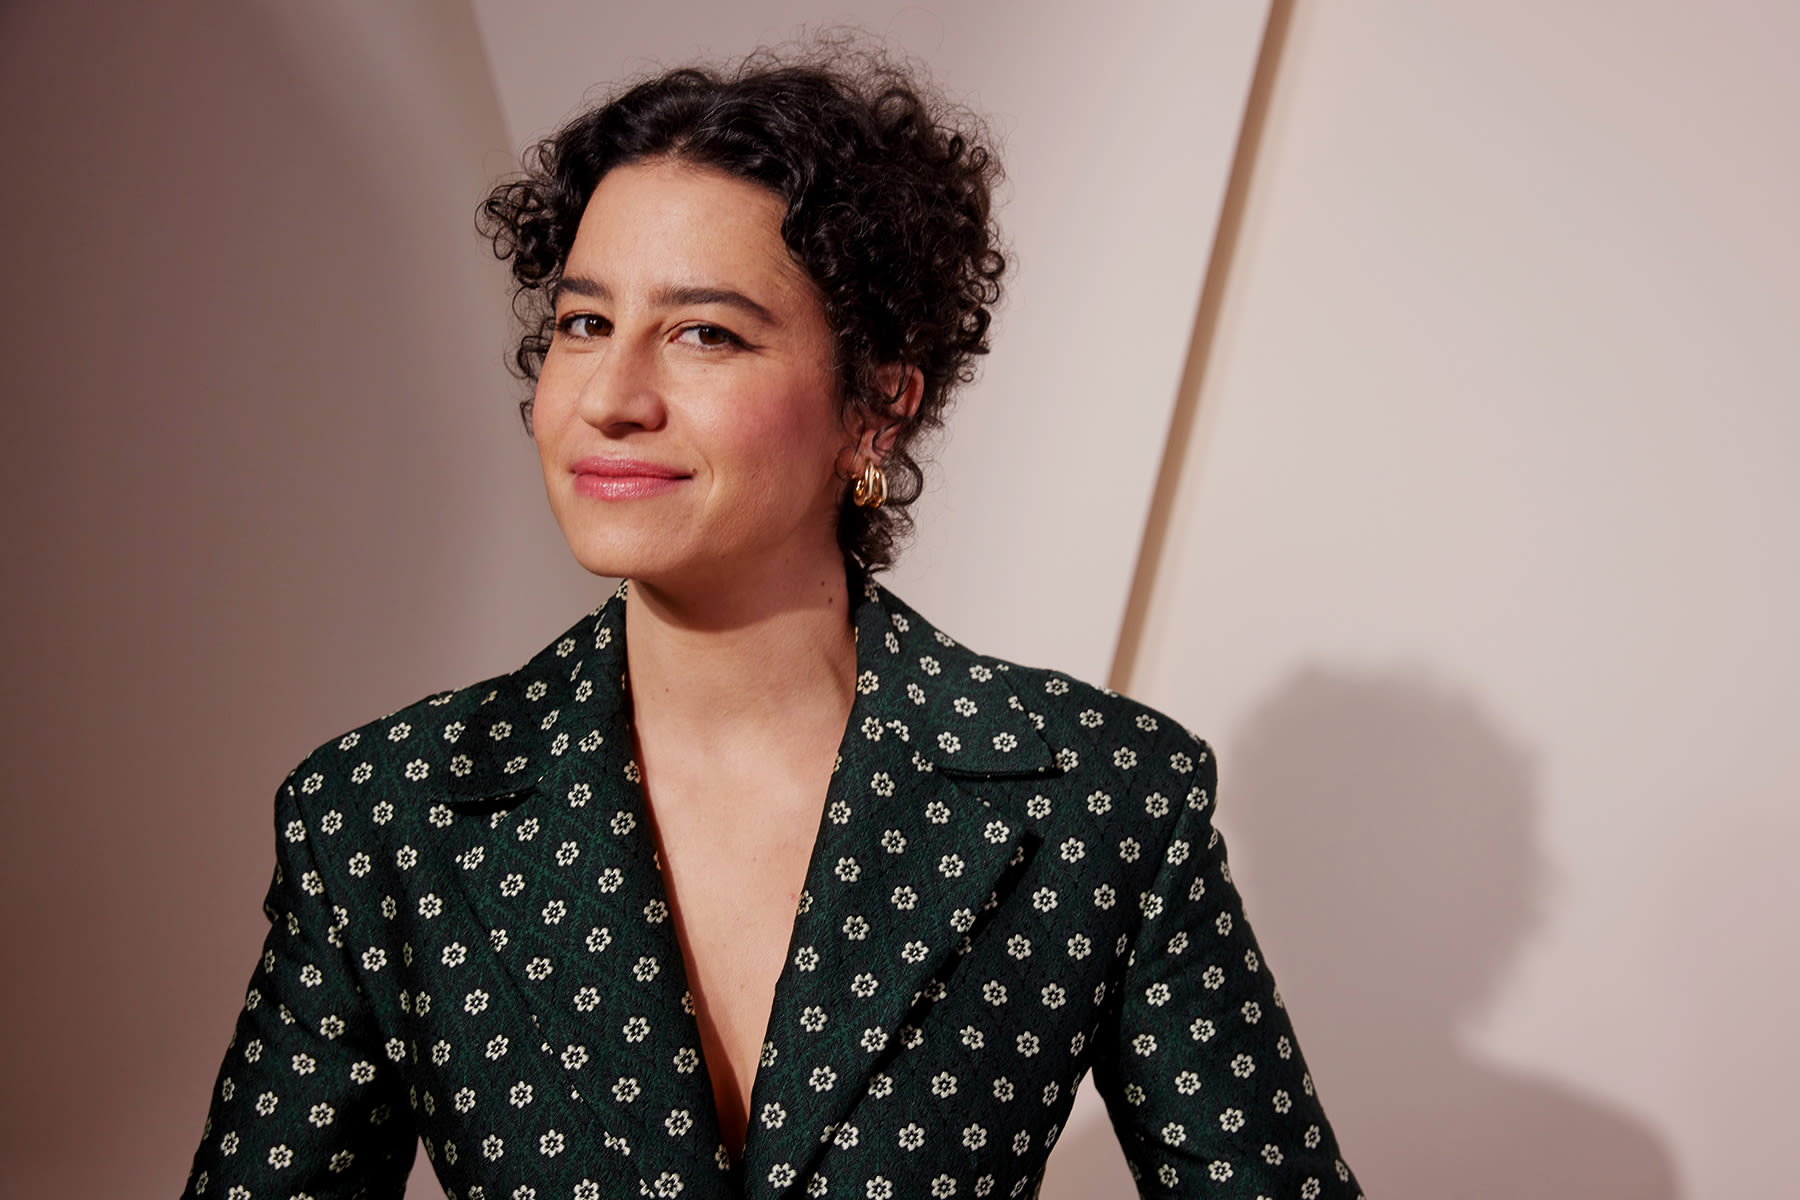 Ilana Glazer Just Wanted to Make a Comedy About ‘Real-Ass Women’